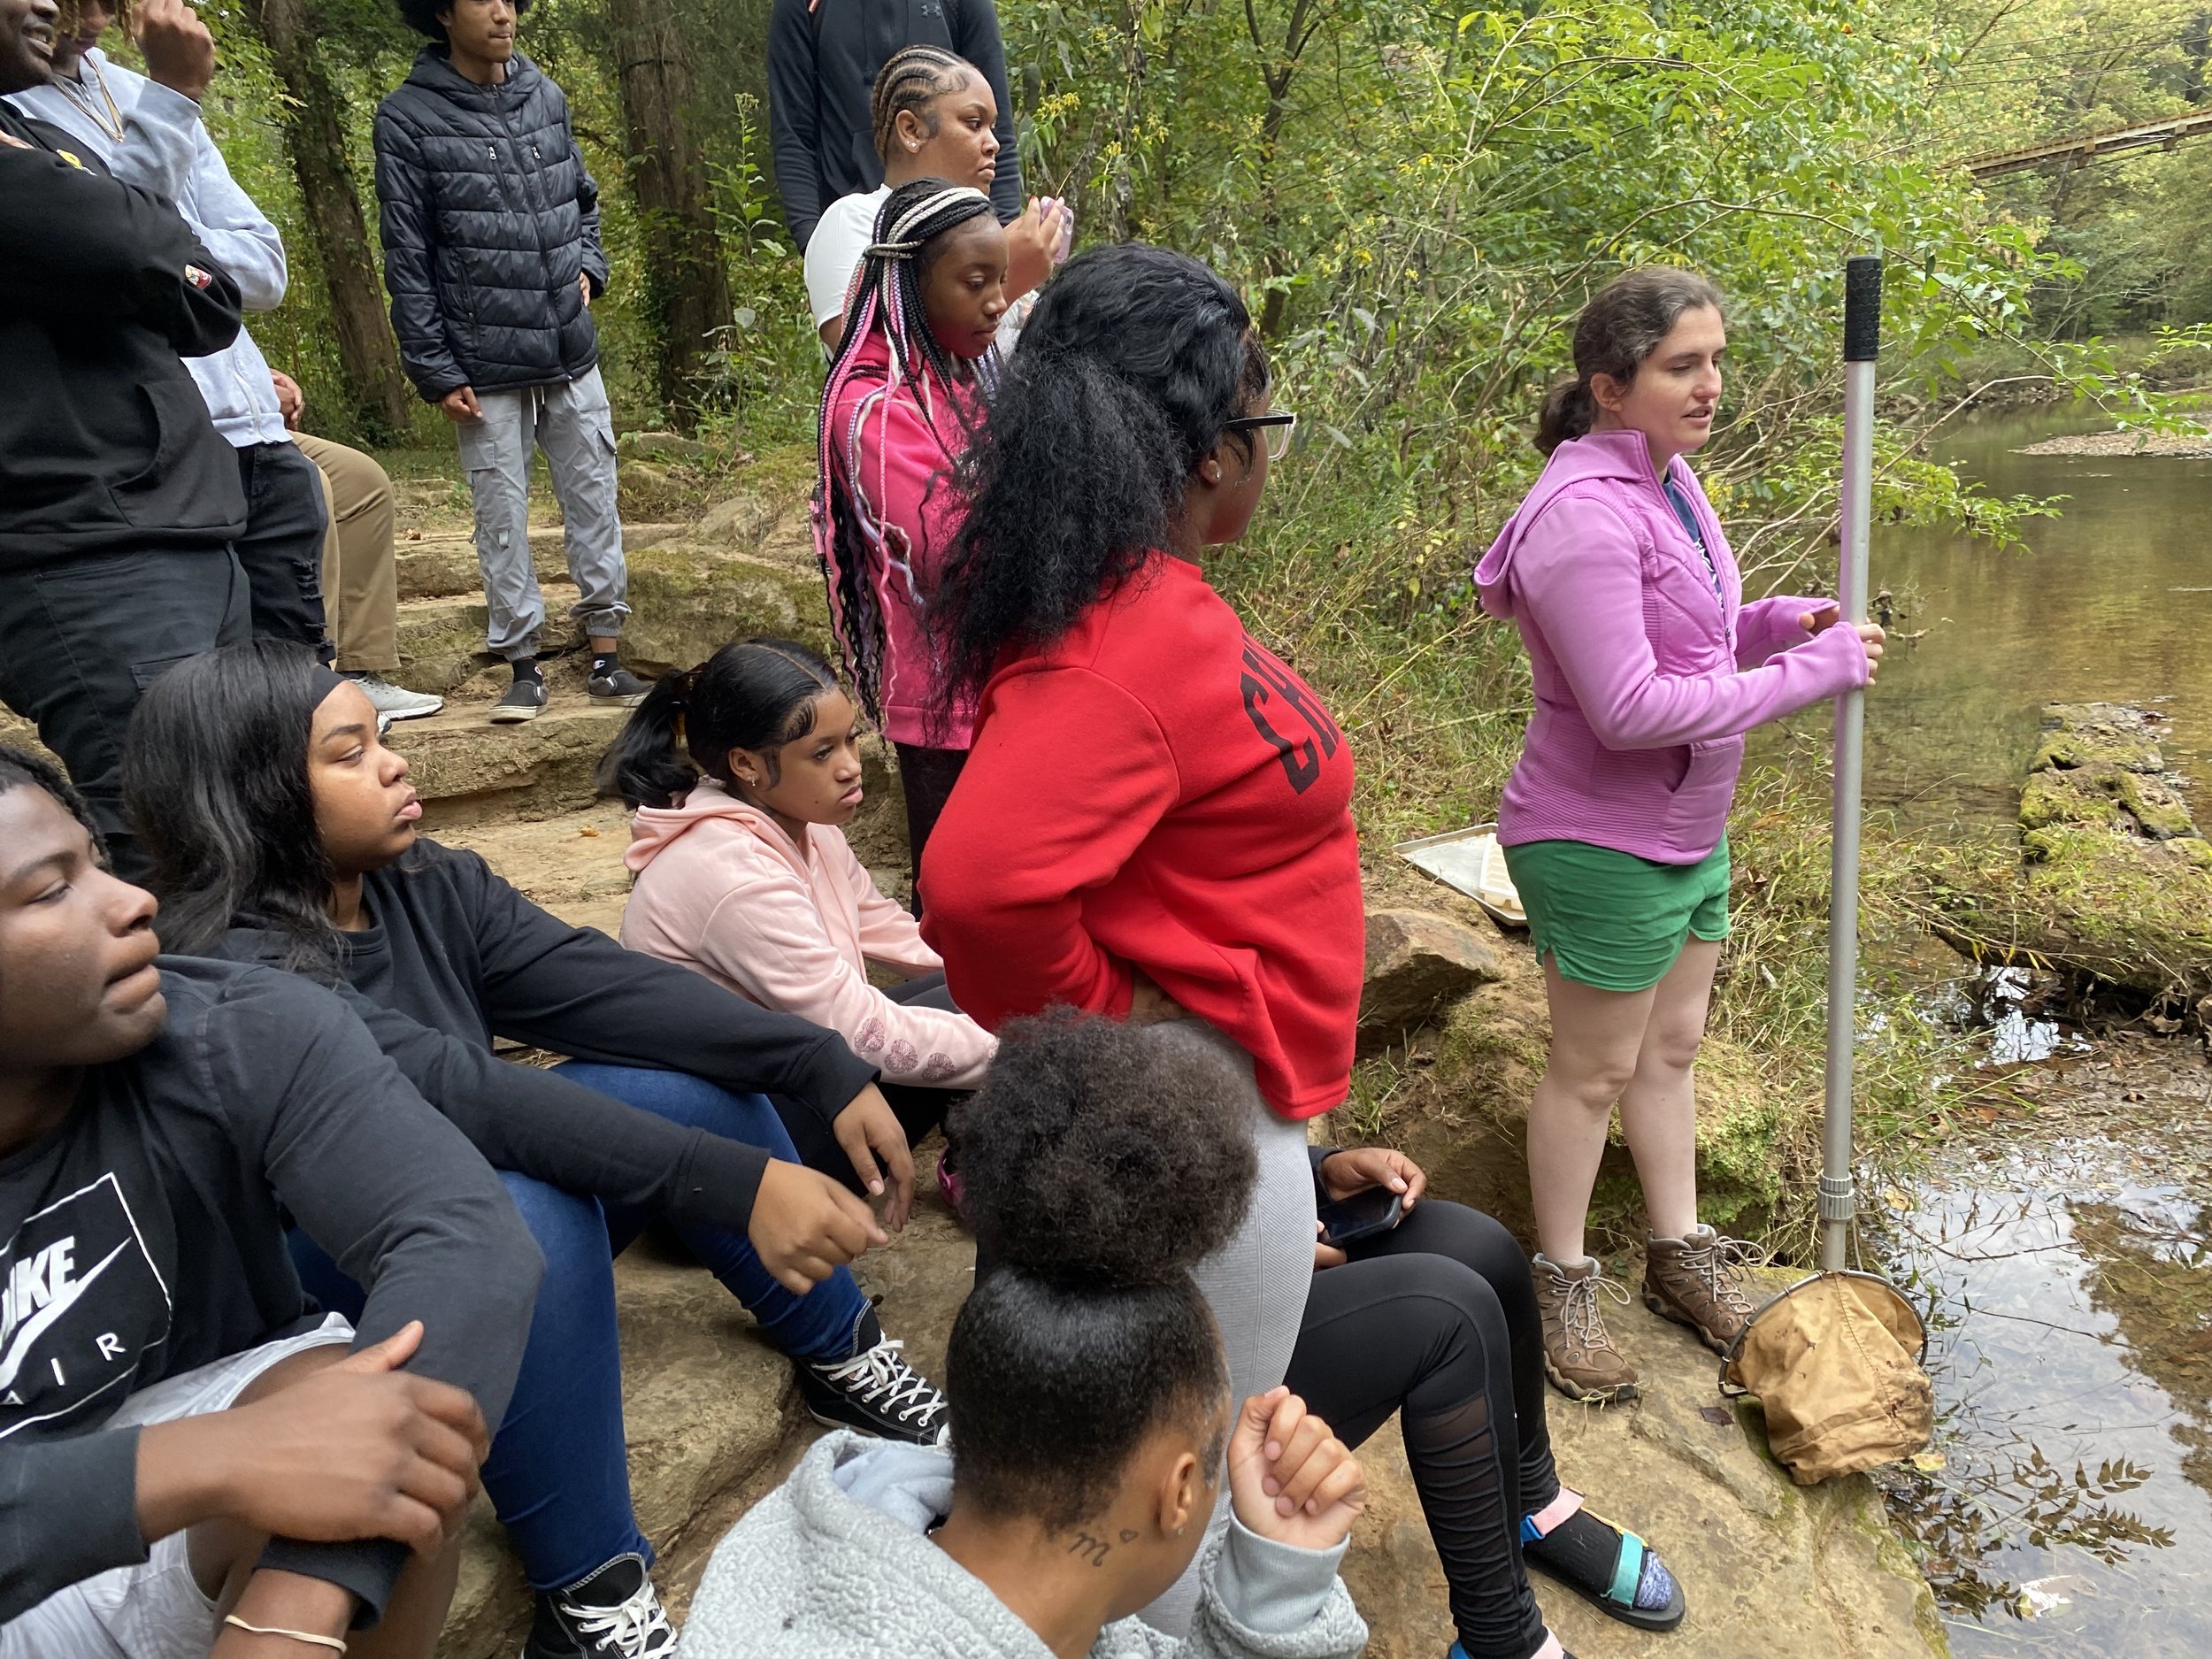    Students from Birmingham City Schools in partnership with Jefferson County Health Department watch as Emily, Wildlife Care Naturalist, demonstrates how to dip-net for aquatic macroinvertebrates. Together we hosted 83 educational programs serving 4